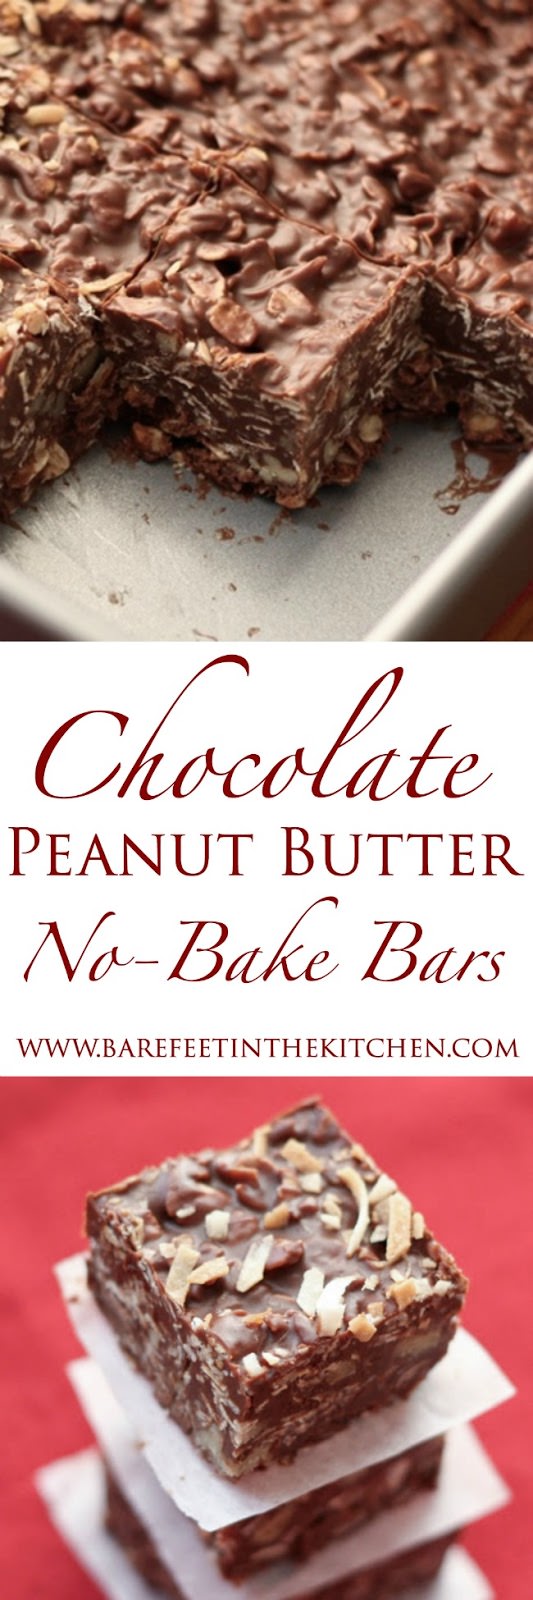 No-Bake Chocolate Peanut Butter Coconut Bites - a quick, healthy and super easy snack filled with deliciousness.